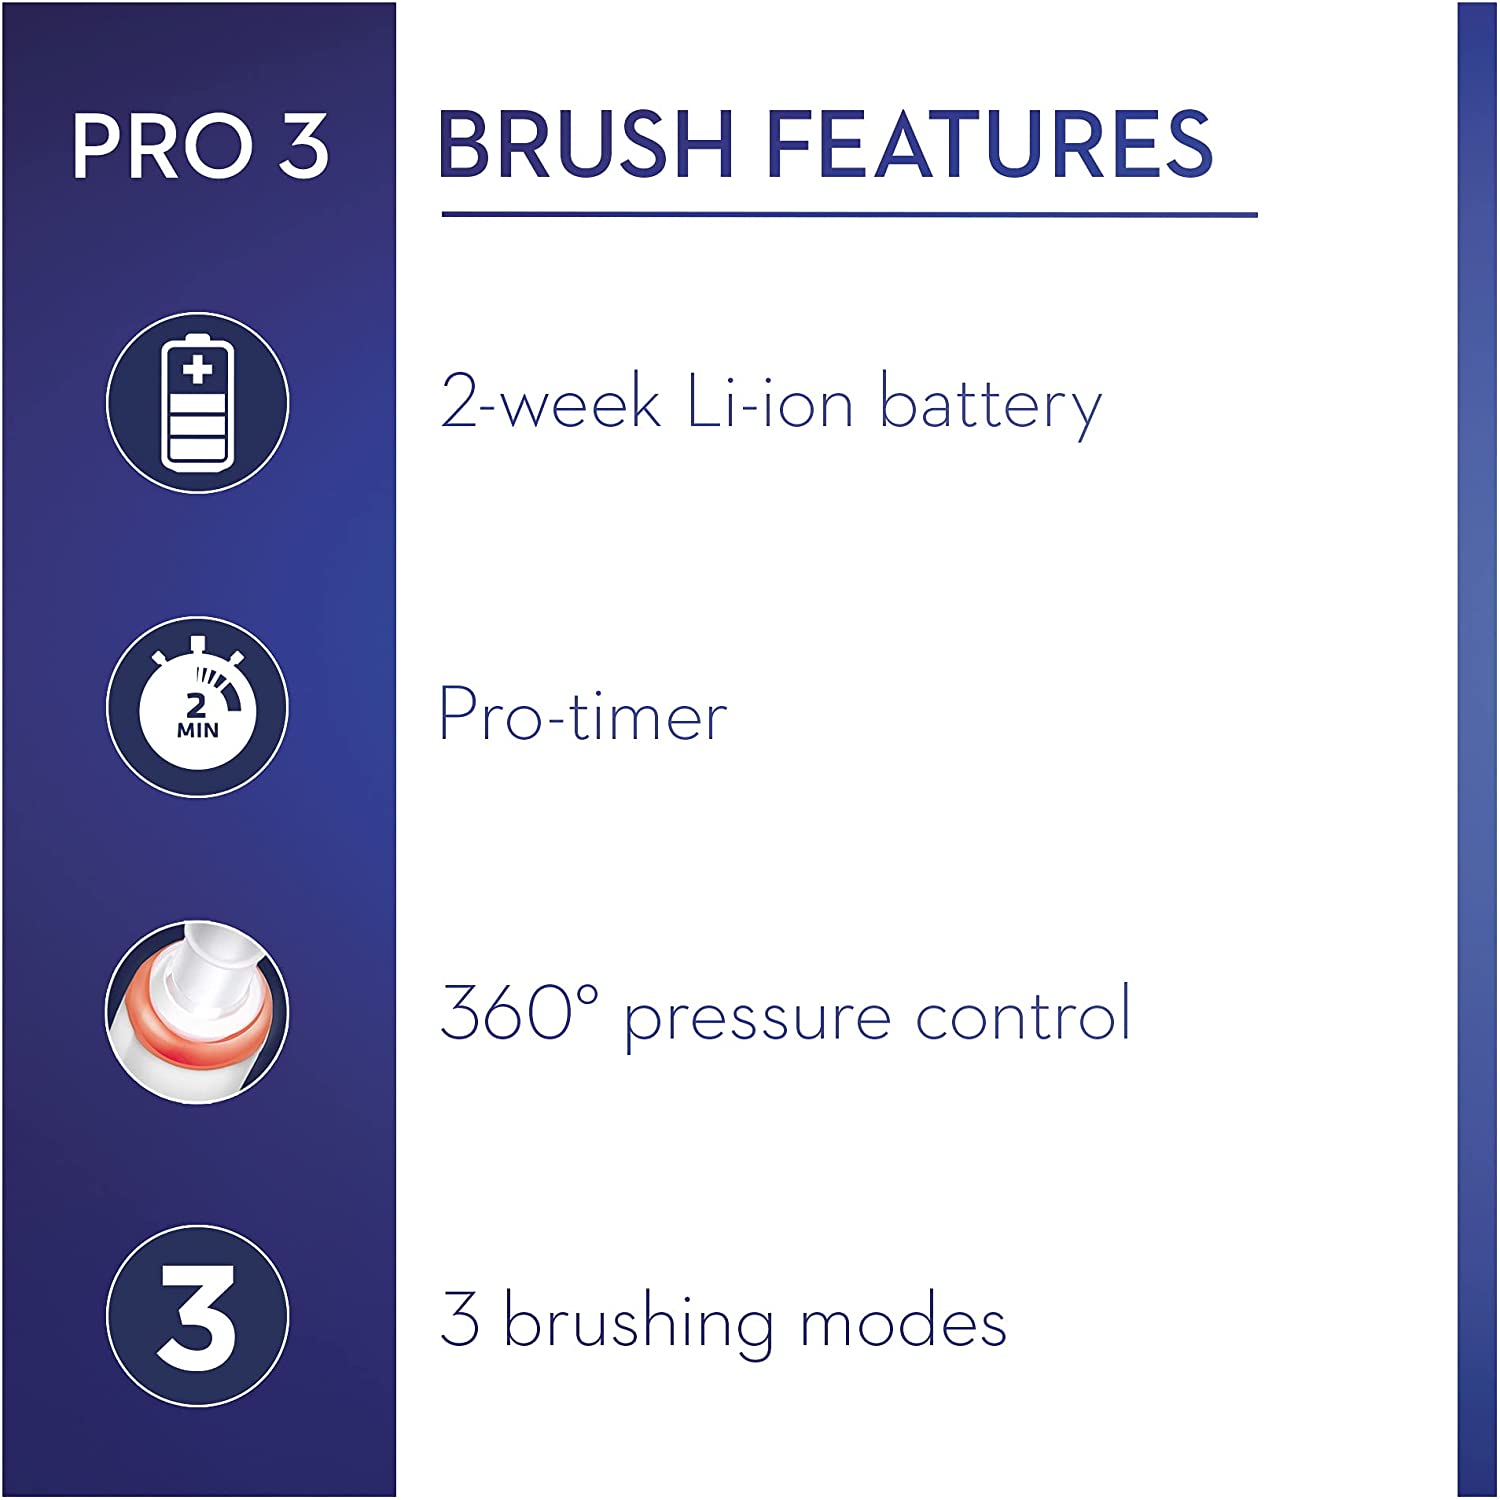 Oral-B Pro 3 - 3900 - Set of 2 Electric Toothbrushes Black, 2 Handles with Visible Pressure Sensor, 2 Toothbrush Heads - Healthxpress.ie